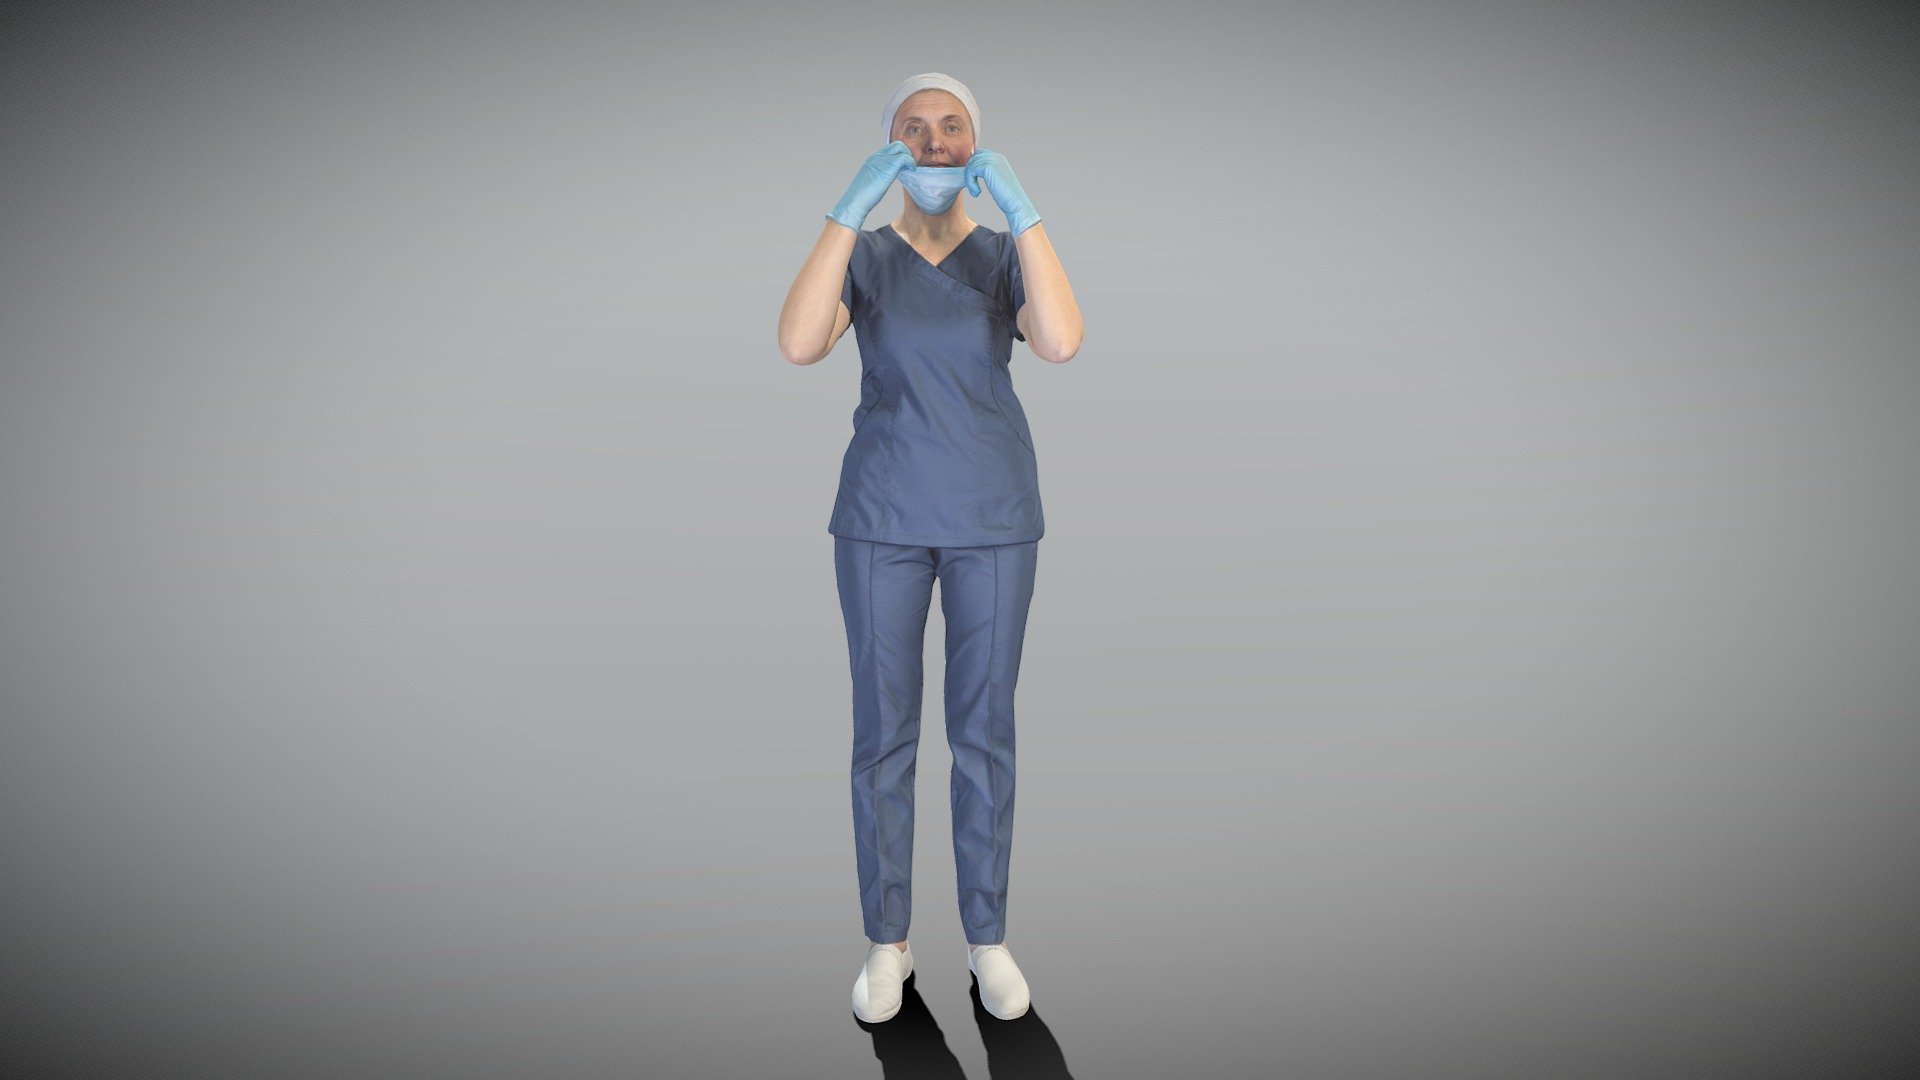 This is a true human size and detailed model of a woman of Caucasian appearance dressed in a medical uniform. The model is captured in typical professional pose to perfectly match a variety of architectural and product visualizations, be used as a background or mid-sized character in advert banners, professional products presentations, educational tutorials, VR/AR content, etc.

Technical characteristics:




digital double 3d scan model

decimated model (100k triangles)

sufficiently clean

PBR textures: Diffuse, Normal, Specular maps

non-overlapping UV map

Download package includes Cinema 4D project file with Redshift shader, OBJ, FBX files, which are applicable for 3ds Max, Maya, Unreal Engine, Unity, Blender, etc. All the textures included into the main archive.

BONUSE: in this package you will also get a high-poly (.ztl tool) clean and retopologized automatically via ZRemesher 3d model in zBrush, thus youll be able to make your own editing of the purchased 3d model.

3D EVERYTHING - Nurse putting on medical mask 323 - Buy Royalty Free 3D model by deep3dstudio 3d model